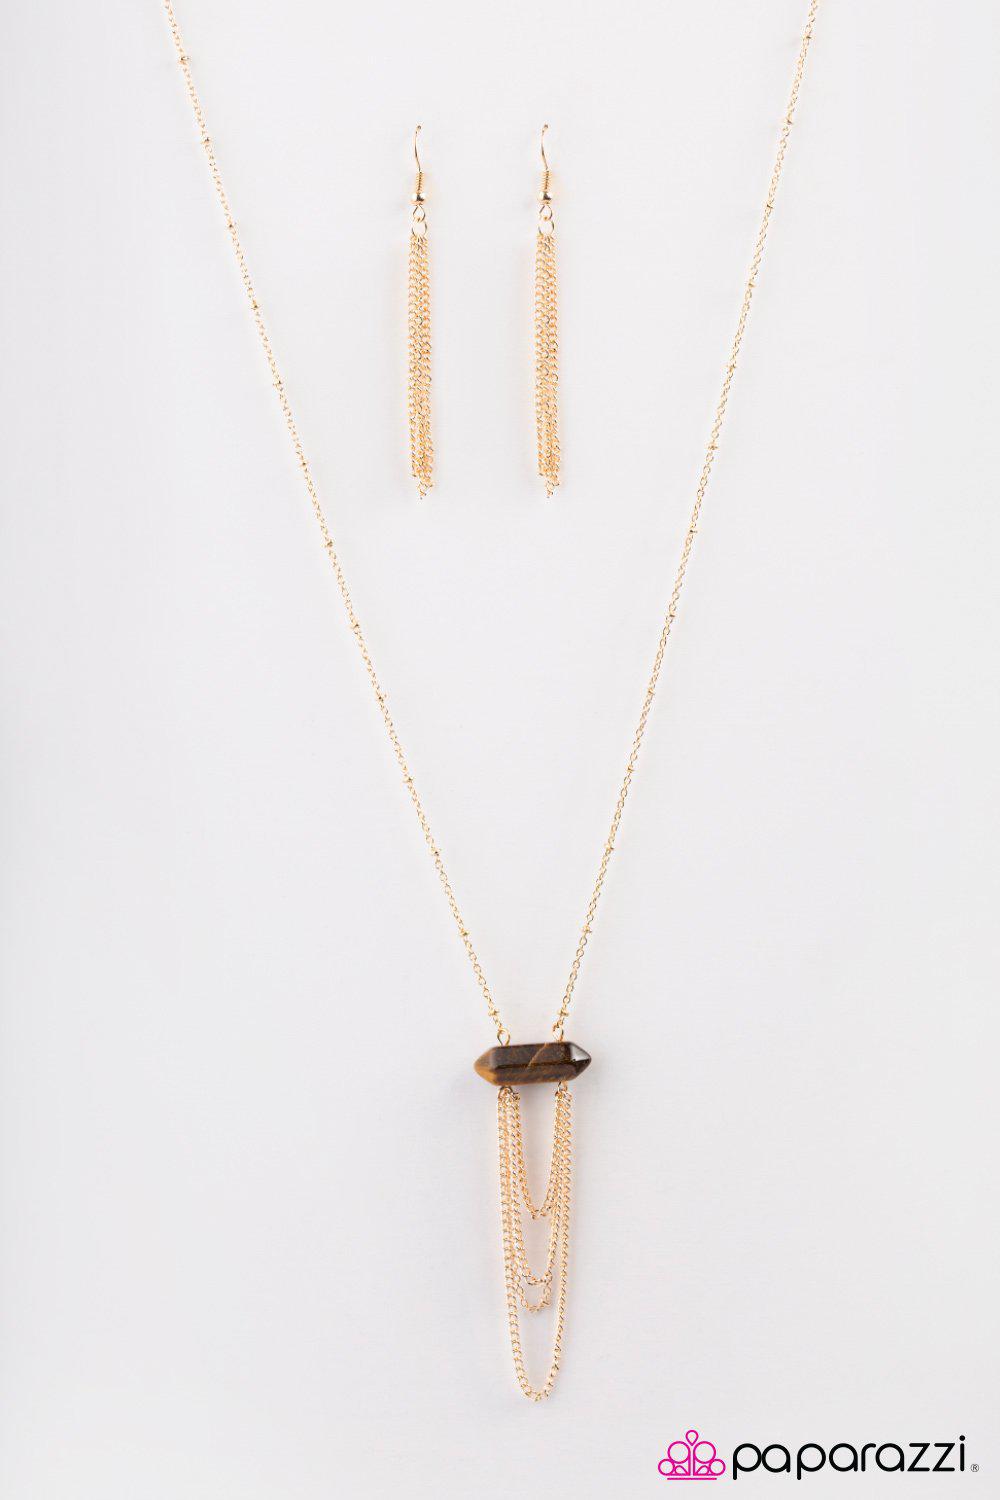 It All Goes To GLOW Gold and Brown Tiger's Eye Necklace - Paparazzi Accessories-CarasShop.com - $5 Jewelry by Cara Jewels